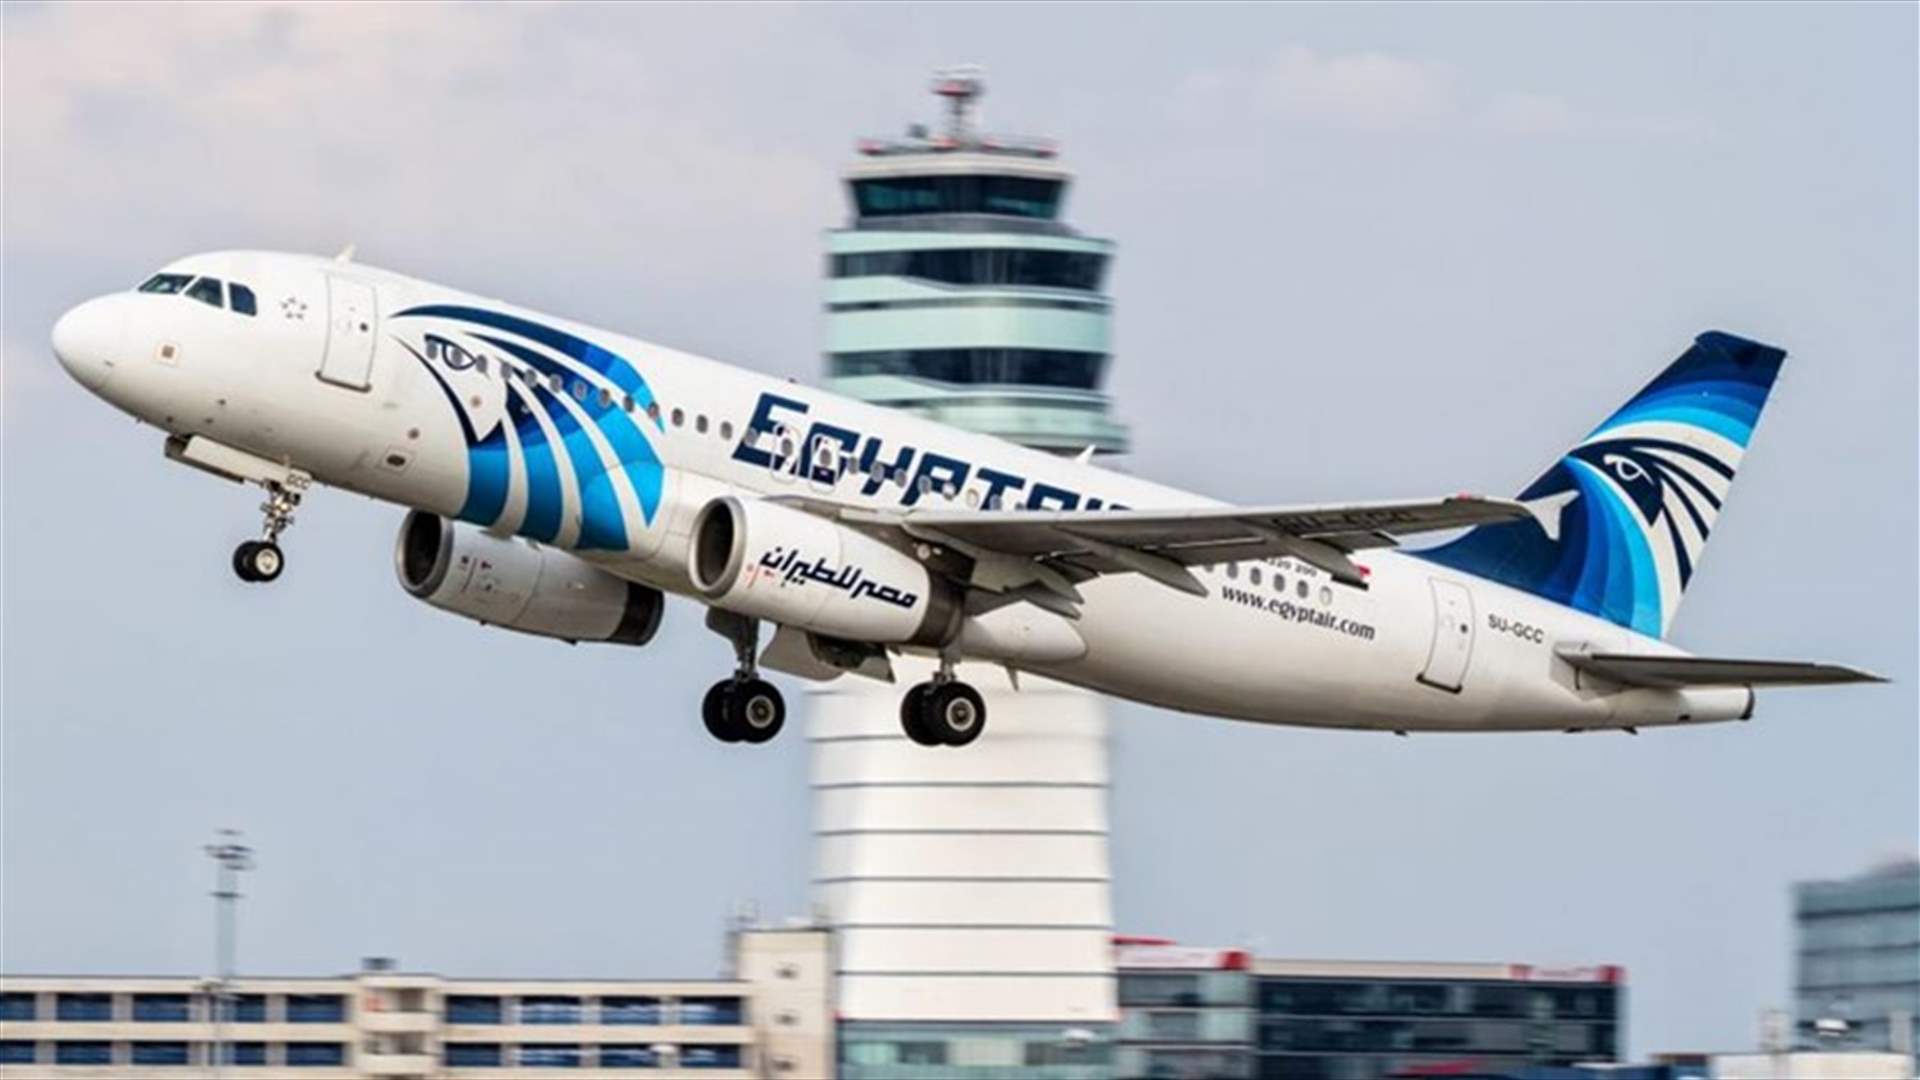 Remains retrieved from EgyptAir wreckage suggest blast on board -Egypt forensics official